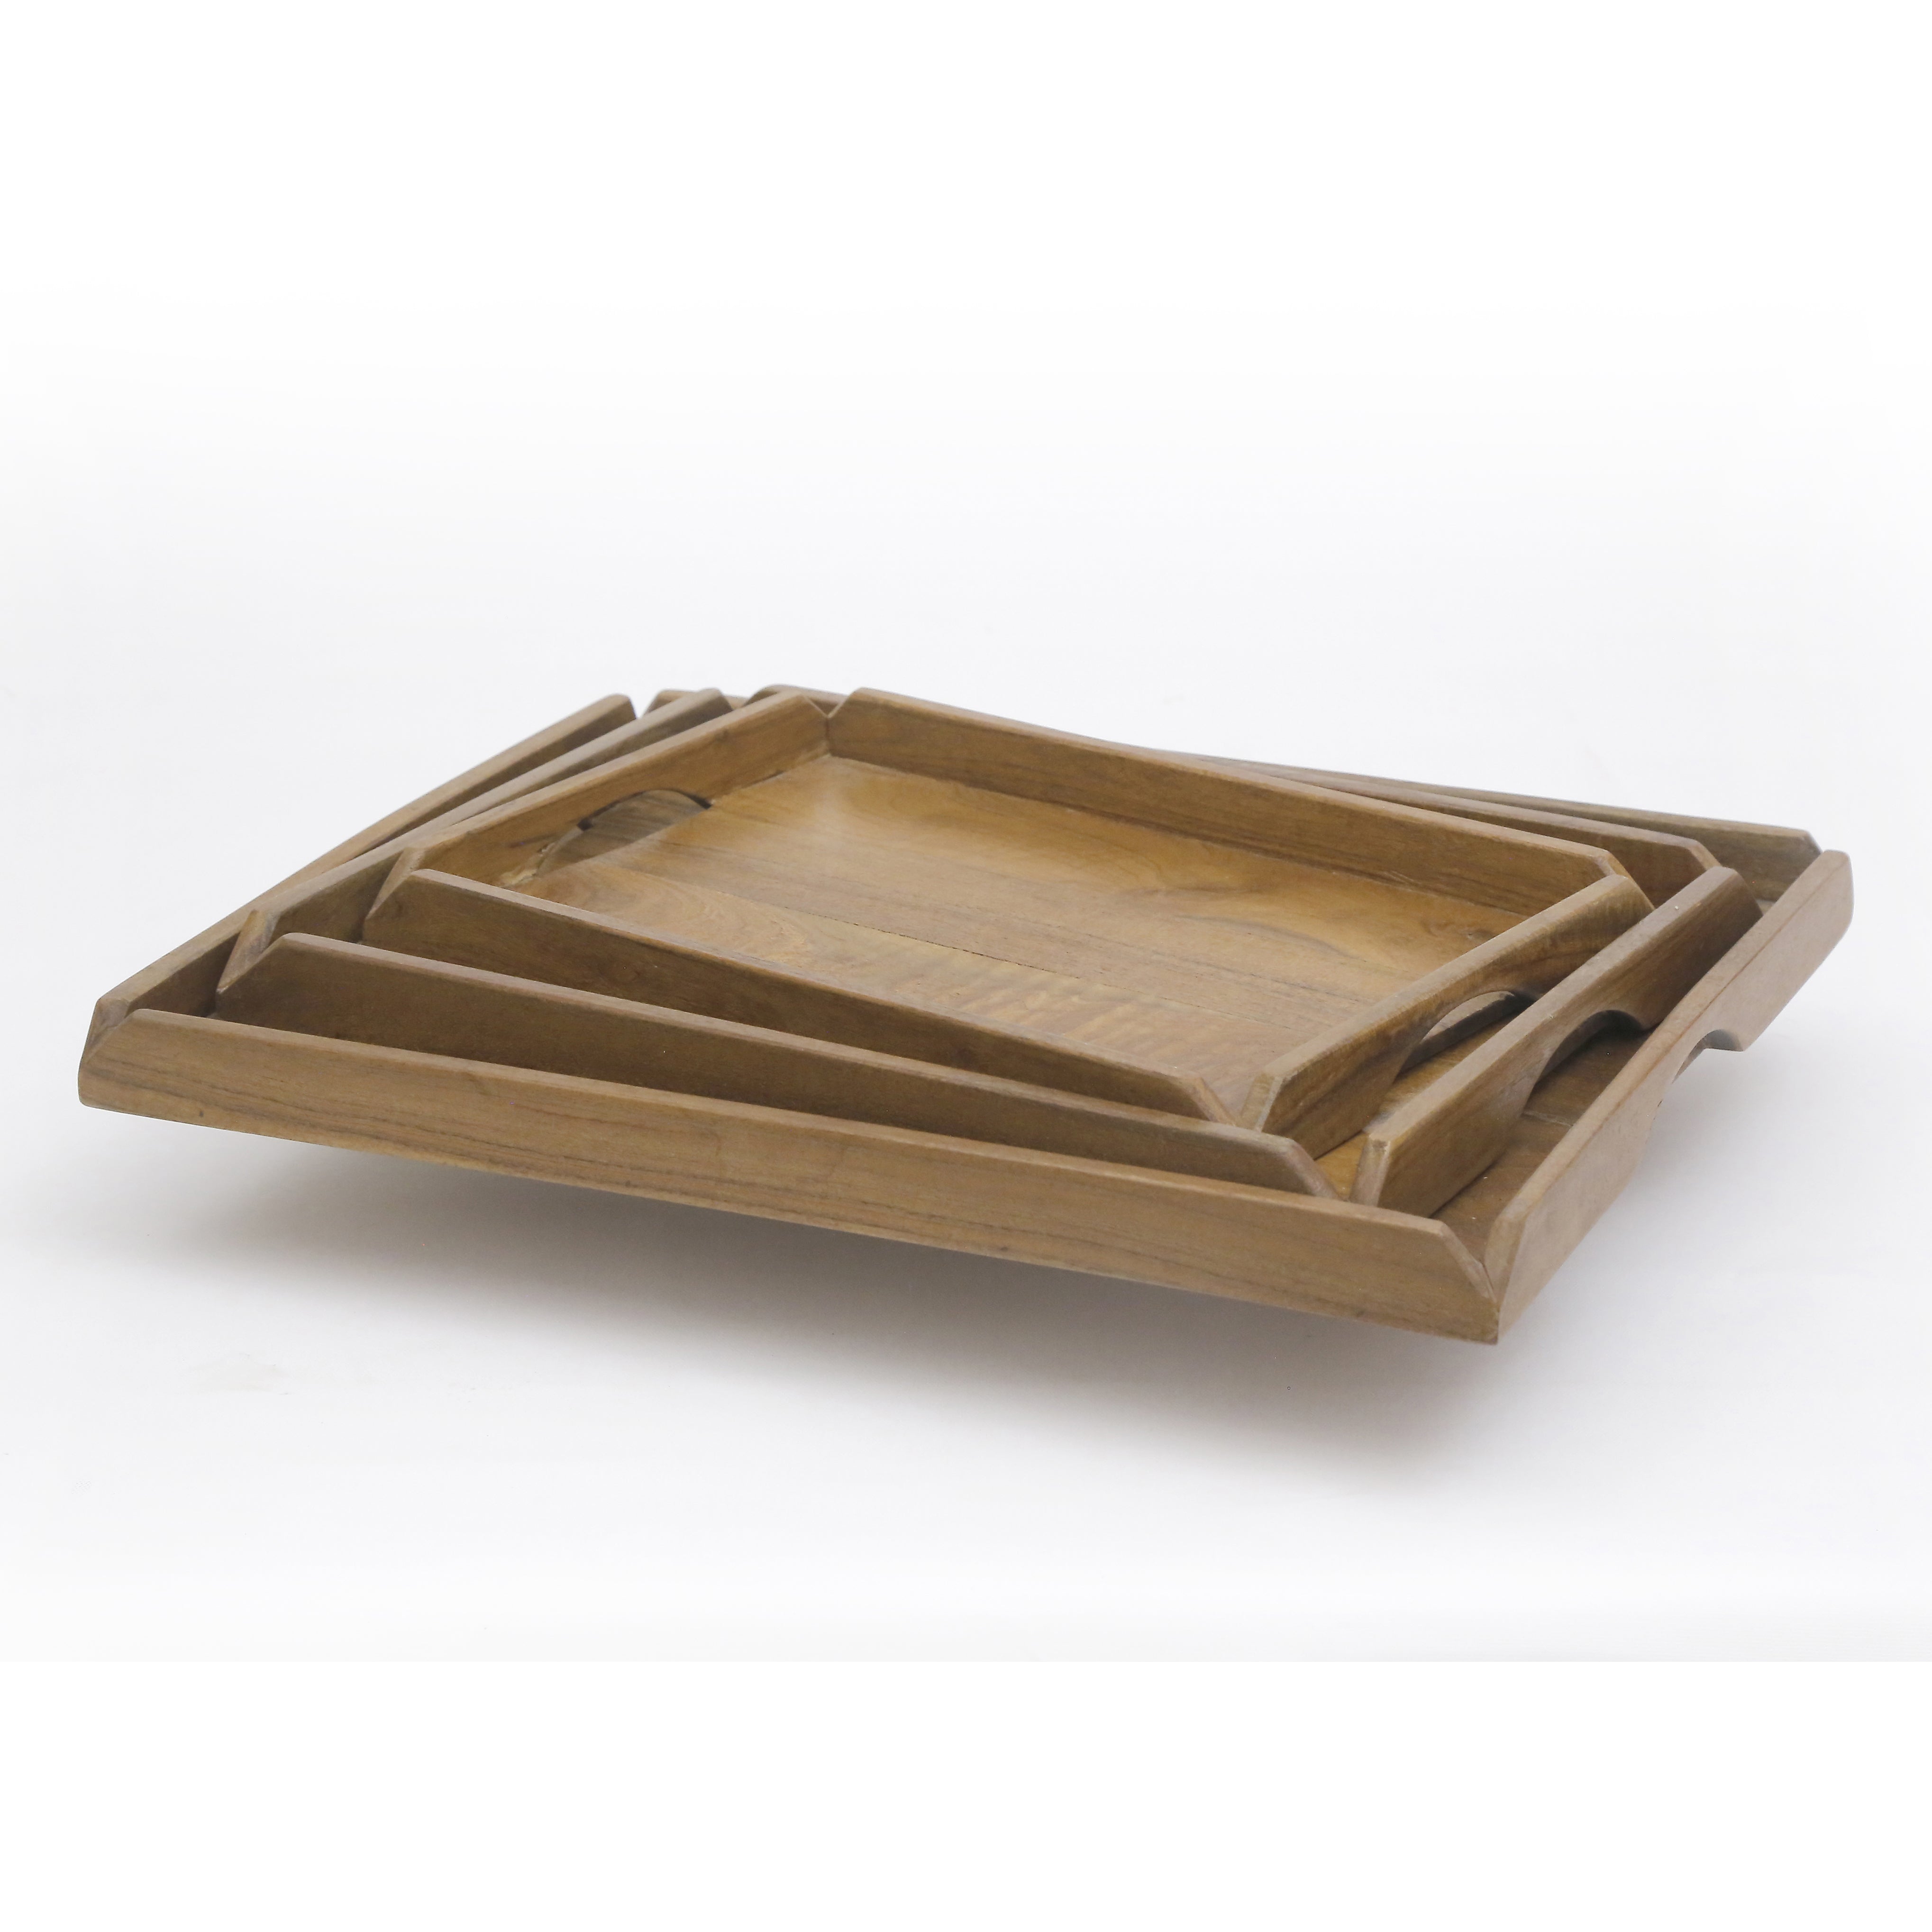 Solid Wood Tray Set - - Set of 3 Tray